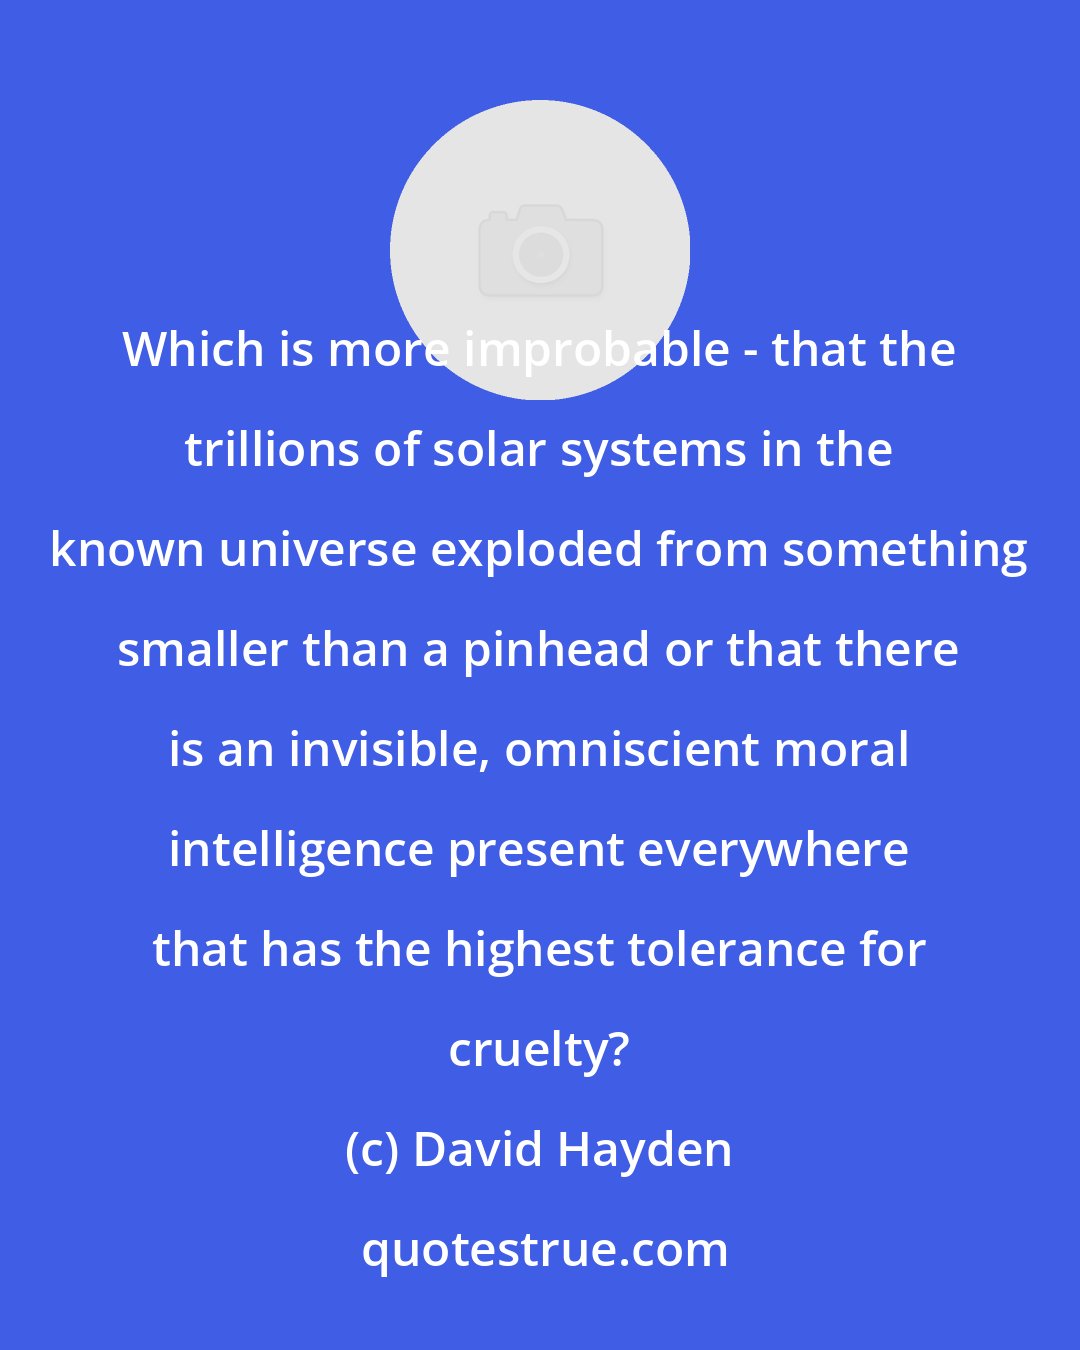 David Hayden: Which is more improbable - that the trillions of solar systems in the known universe exploded from something smaller than a pinhead or that there is an invisible, omniscient moral intelligence present everywhere that has the highest tolerance for cruelty?